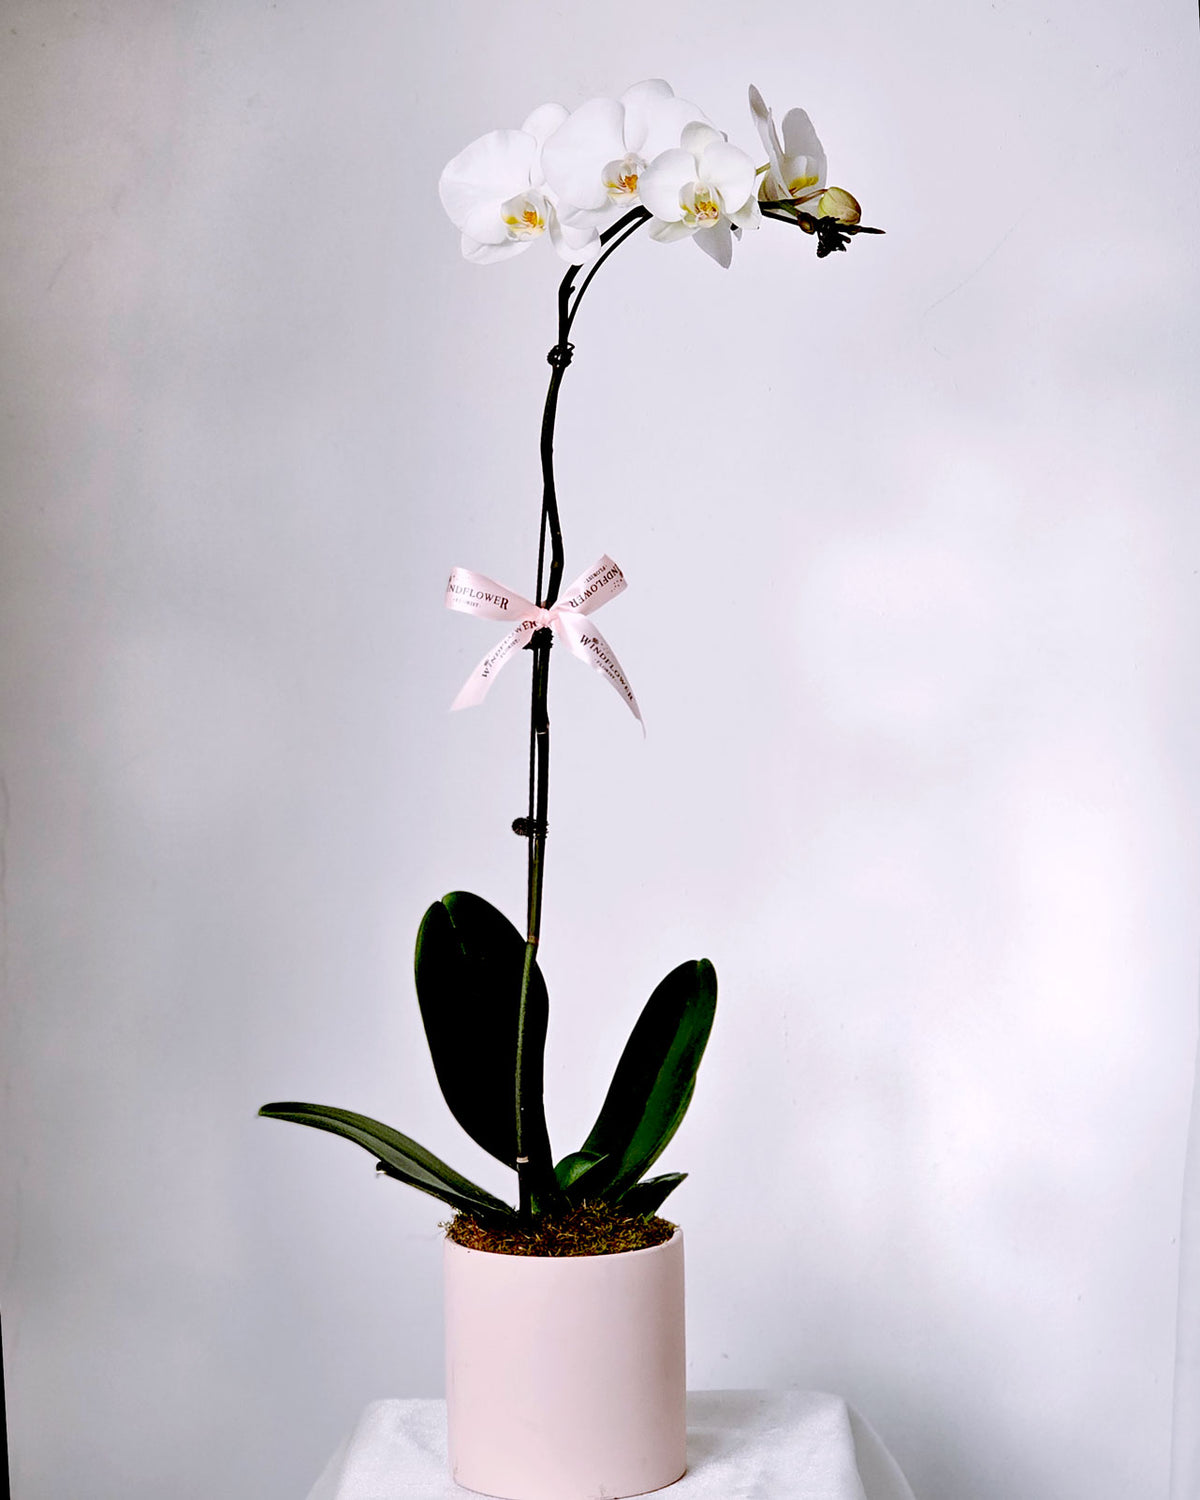 [2 days in advance] Phalaenopsis Orchid